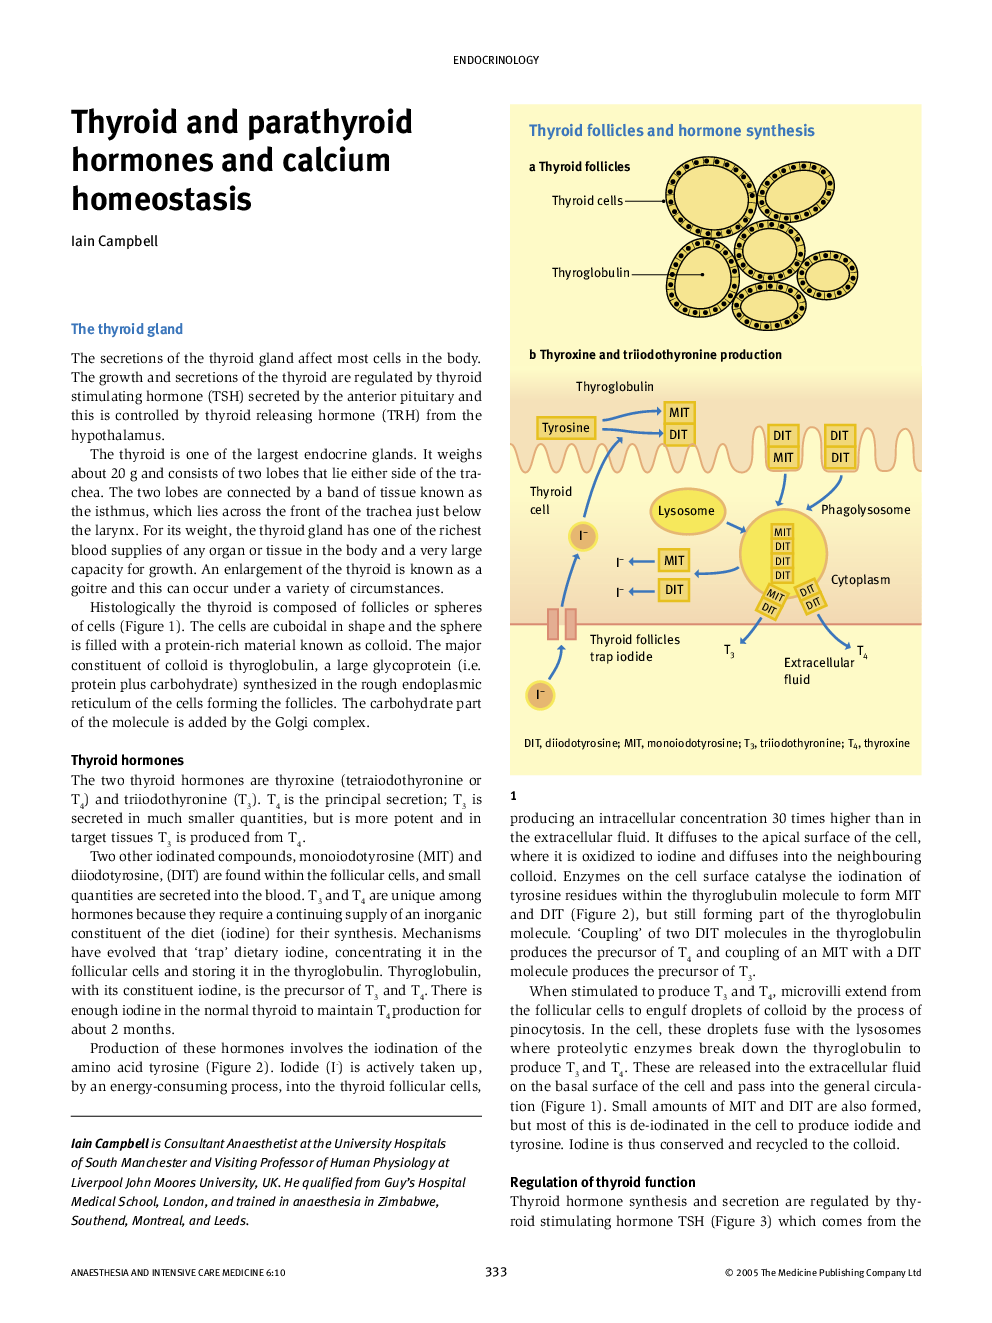 Thyroid and parathyroid hormones and calcium homeostasis